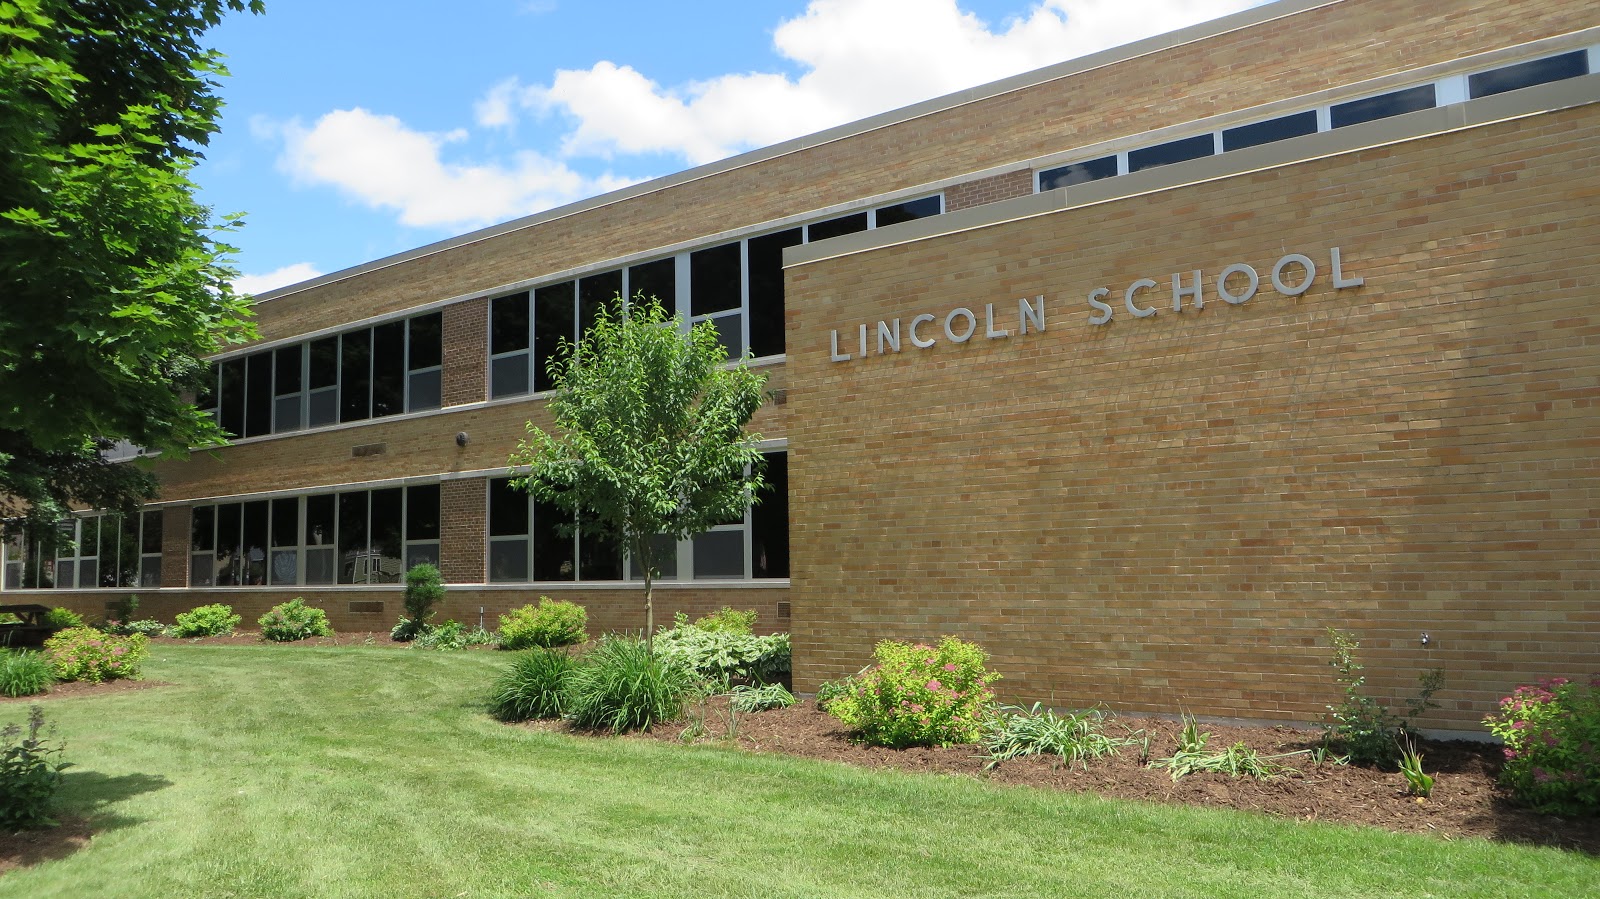 LSS - Lutheran Social Services - Lincoln Elementary School